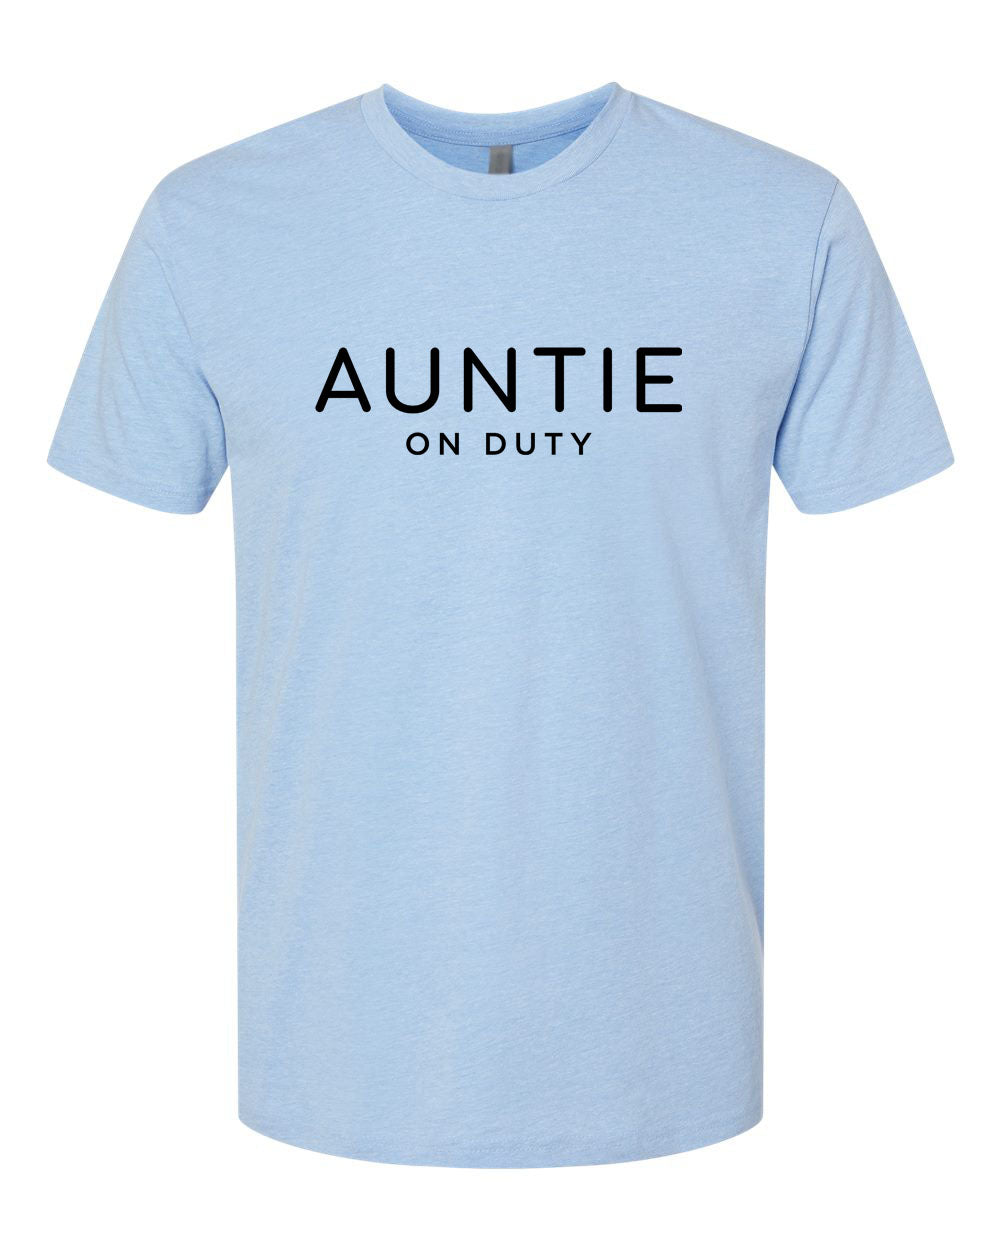 Auntie On Duty Spring & Summer Collection Mint T-Shirt